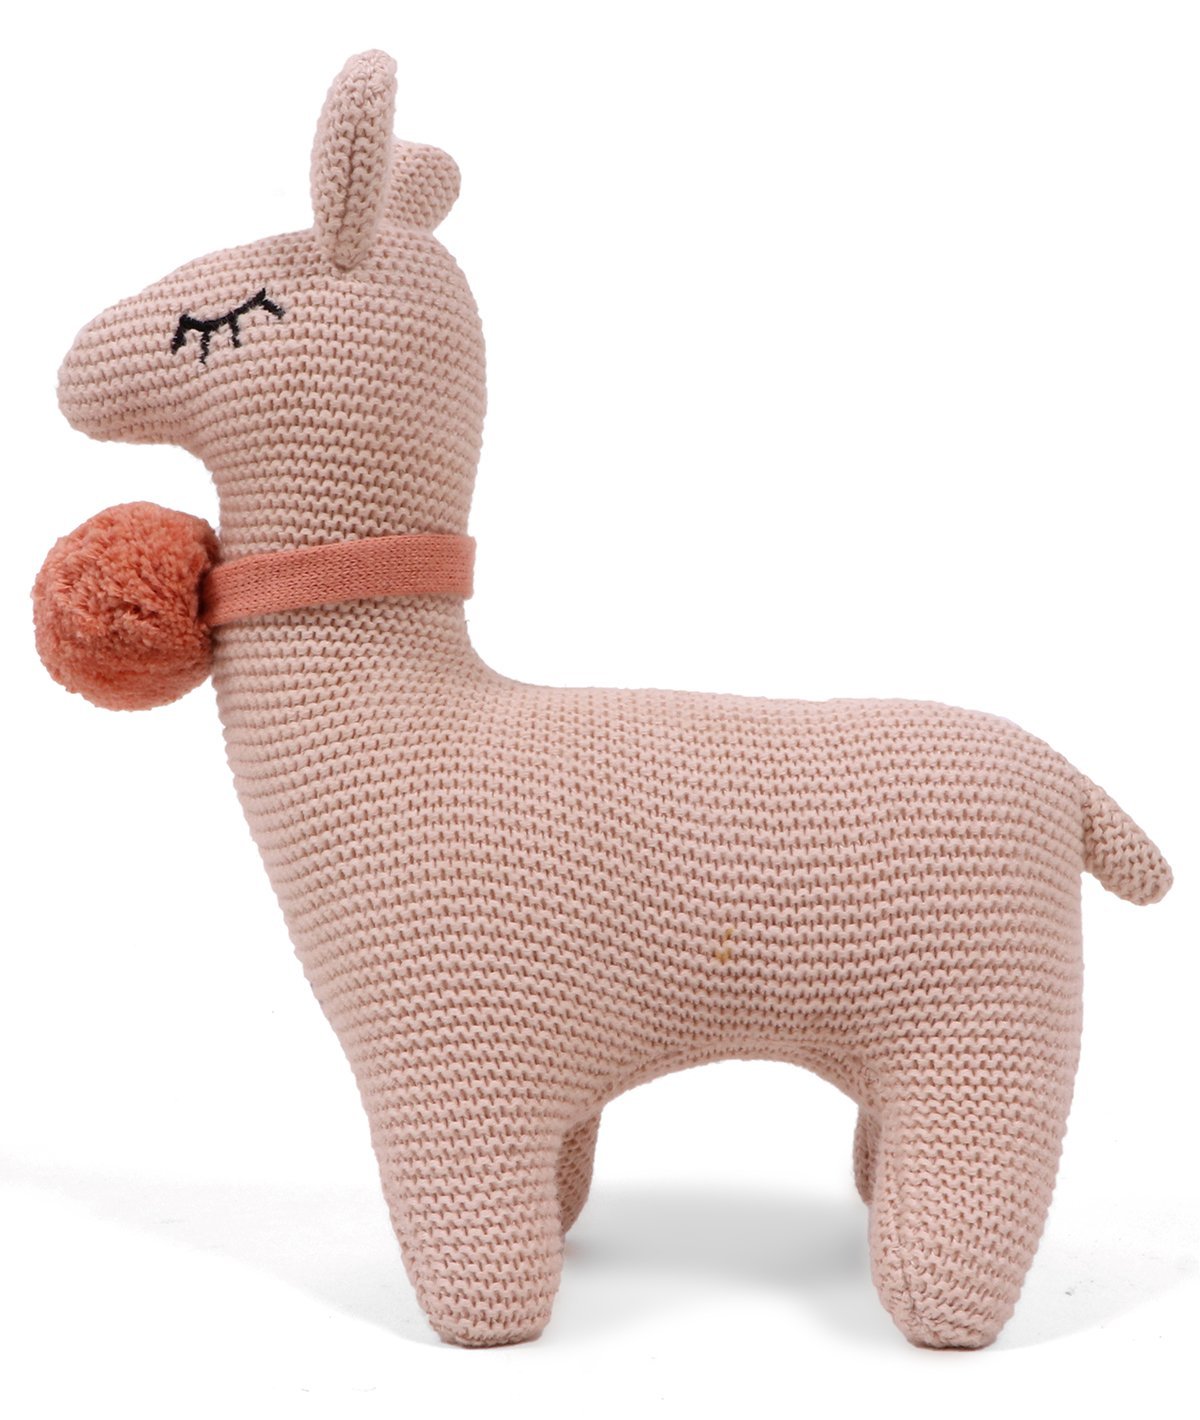 Sweet Llama - Shell Color 100% Cotton Knitted Stuffed Soft Toy for Babies / Kids